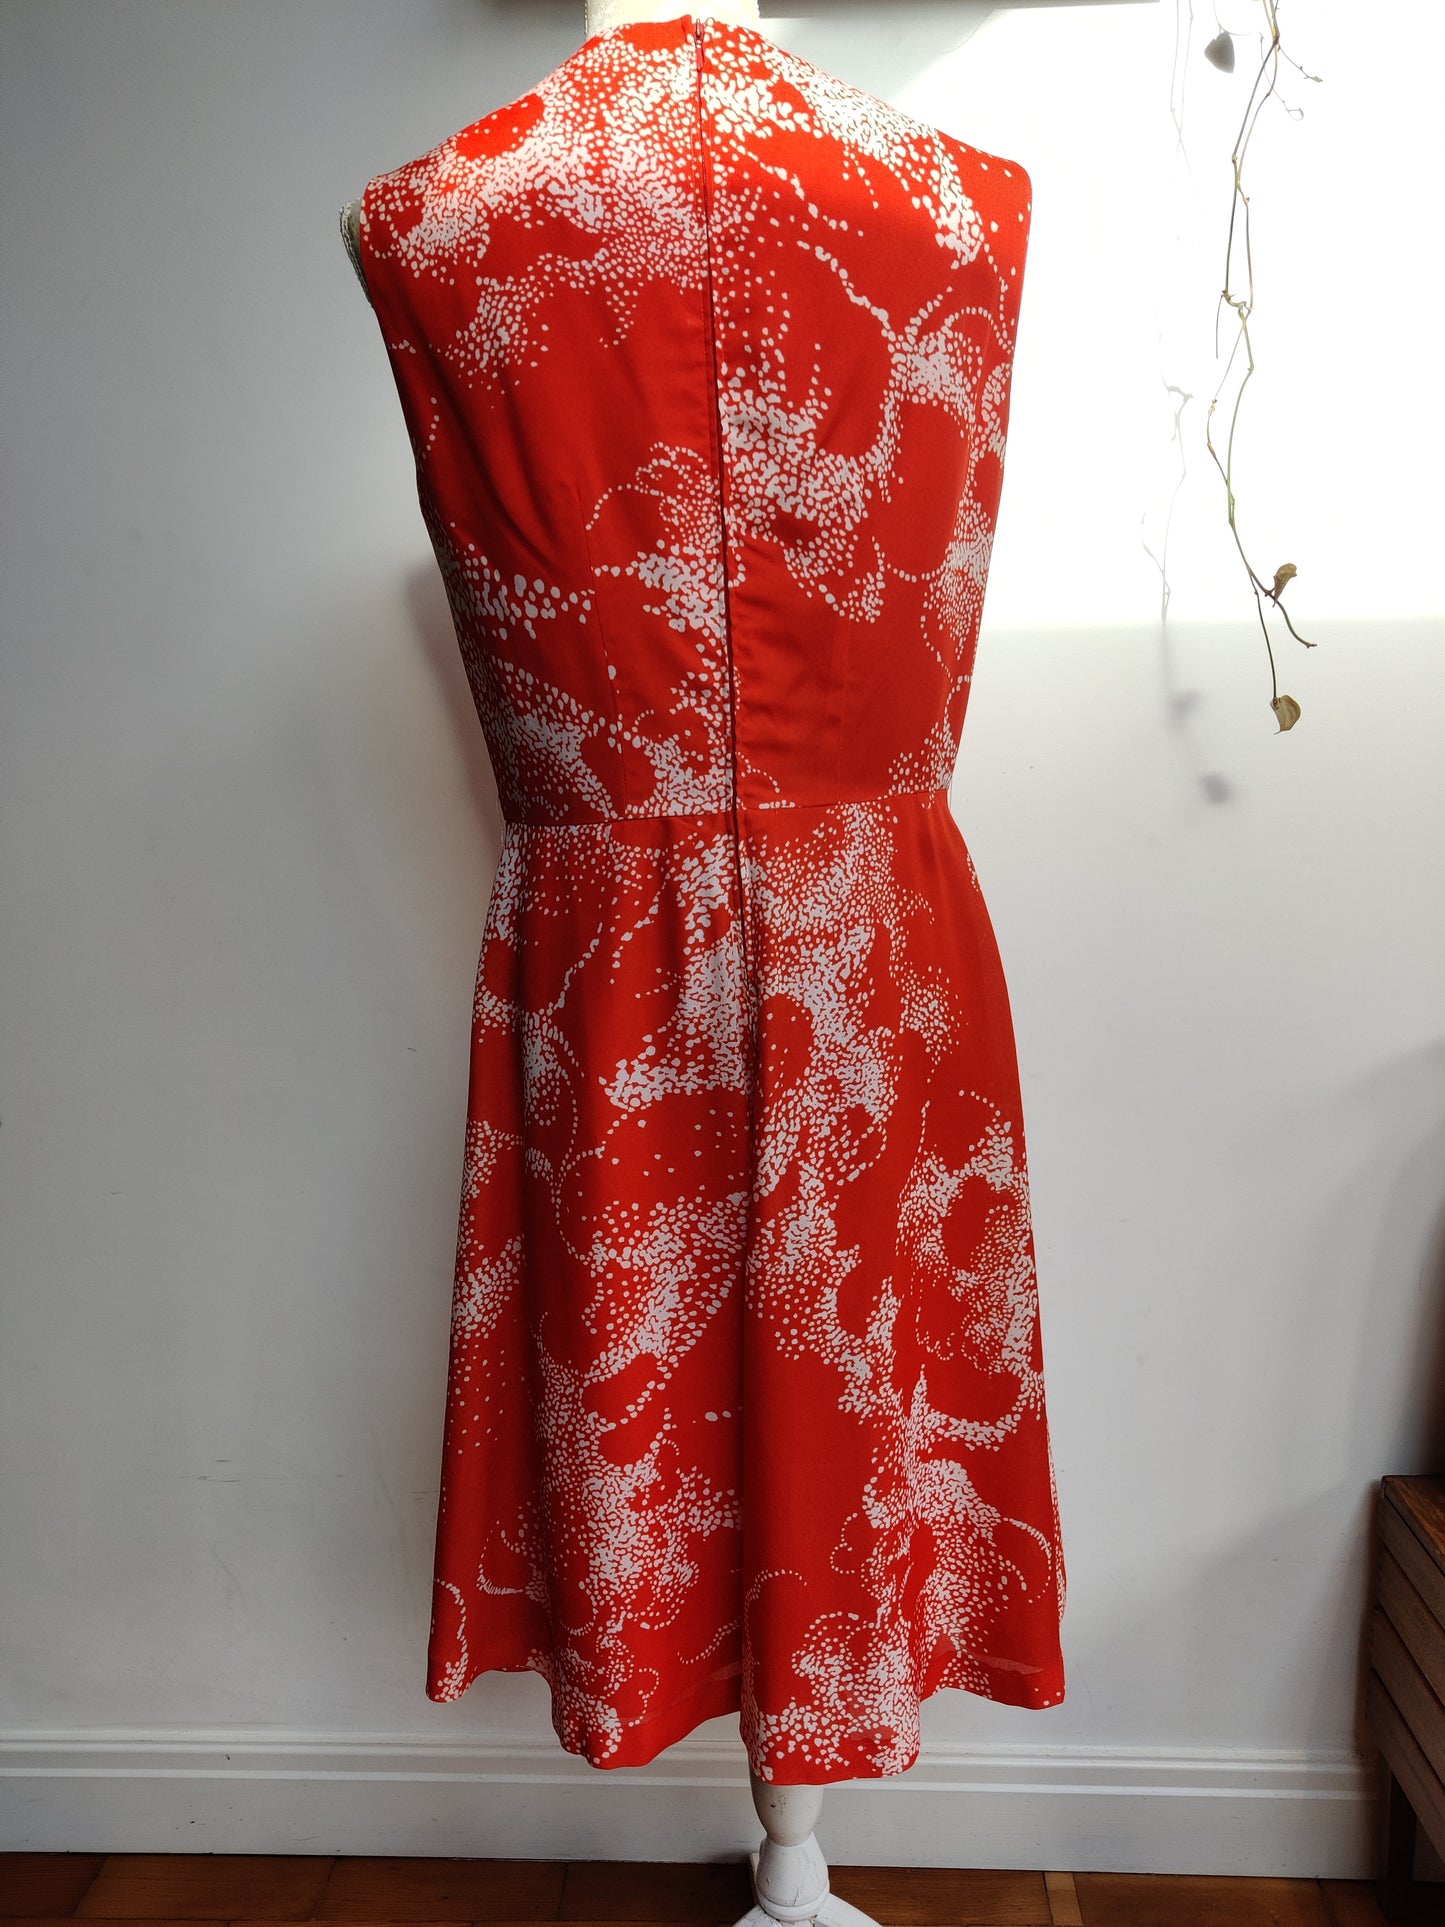 Stunning red and white 50s dress. 12